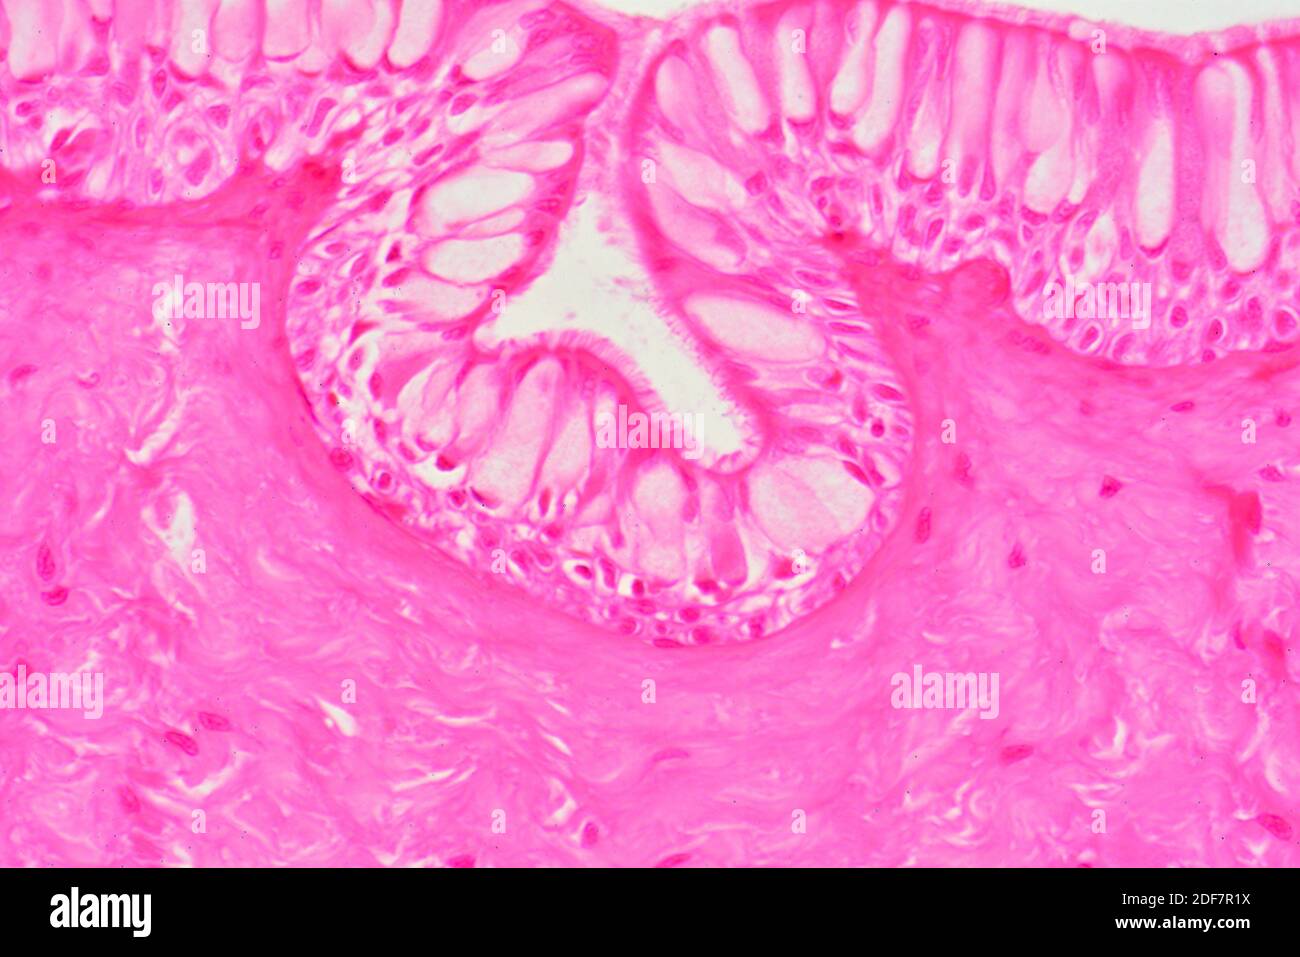 Human columnar ciliated epithelium. X300 at 10 cm wide. Stock Photo